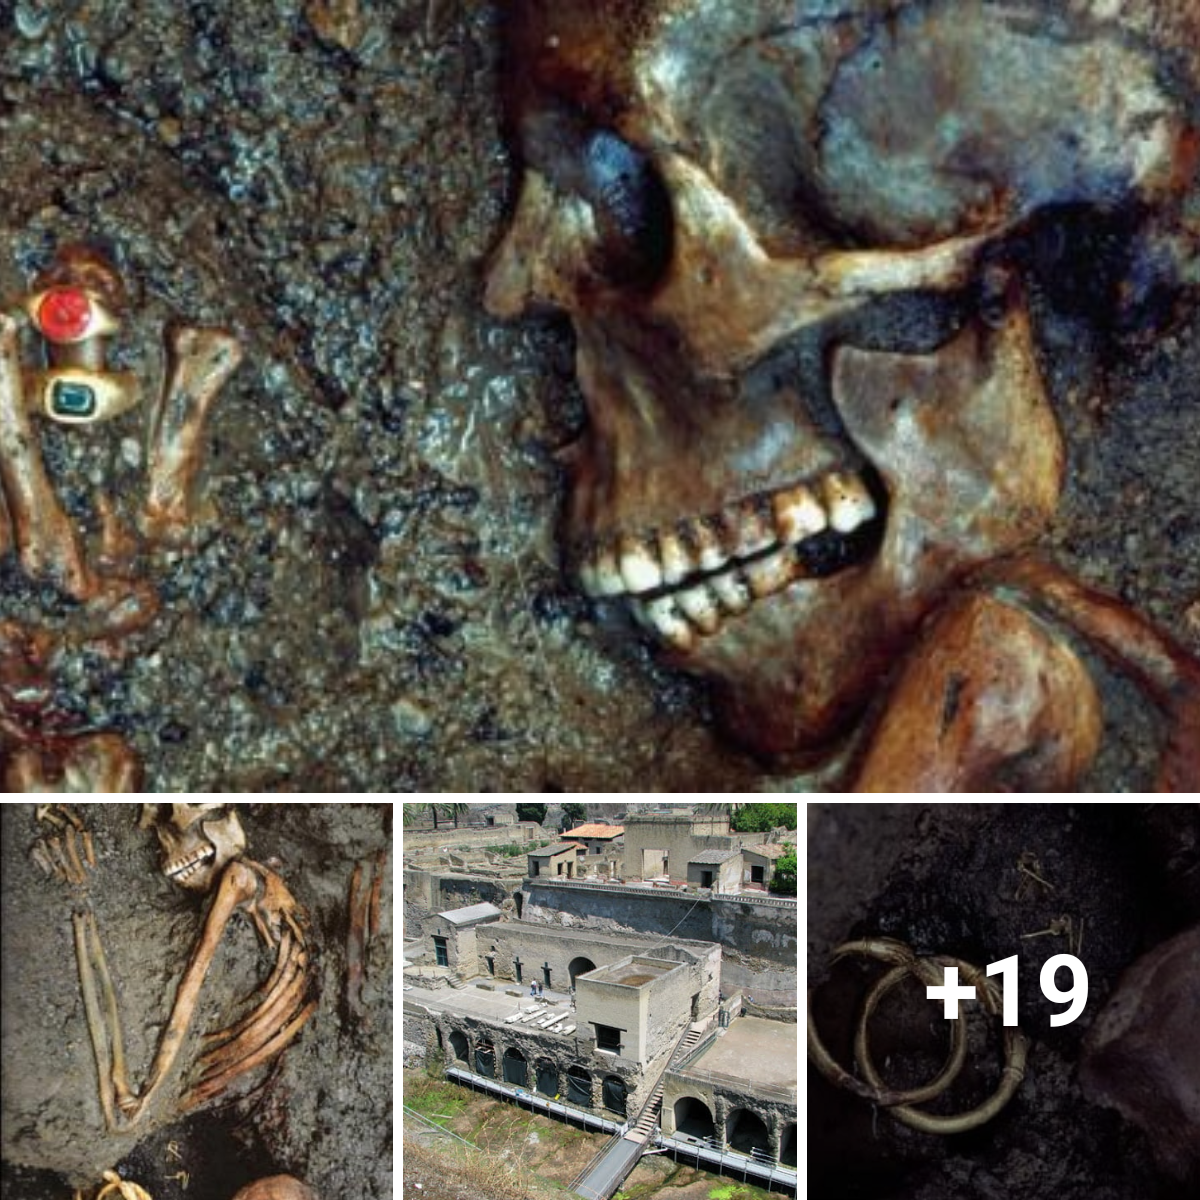 See the skeletal remains of those interred beside an immense amount of gems.